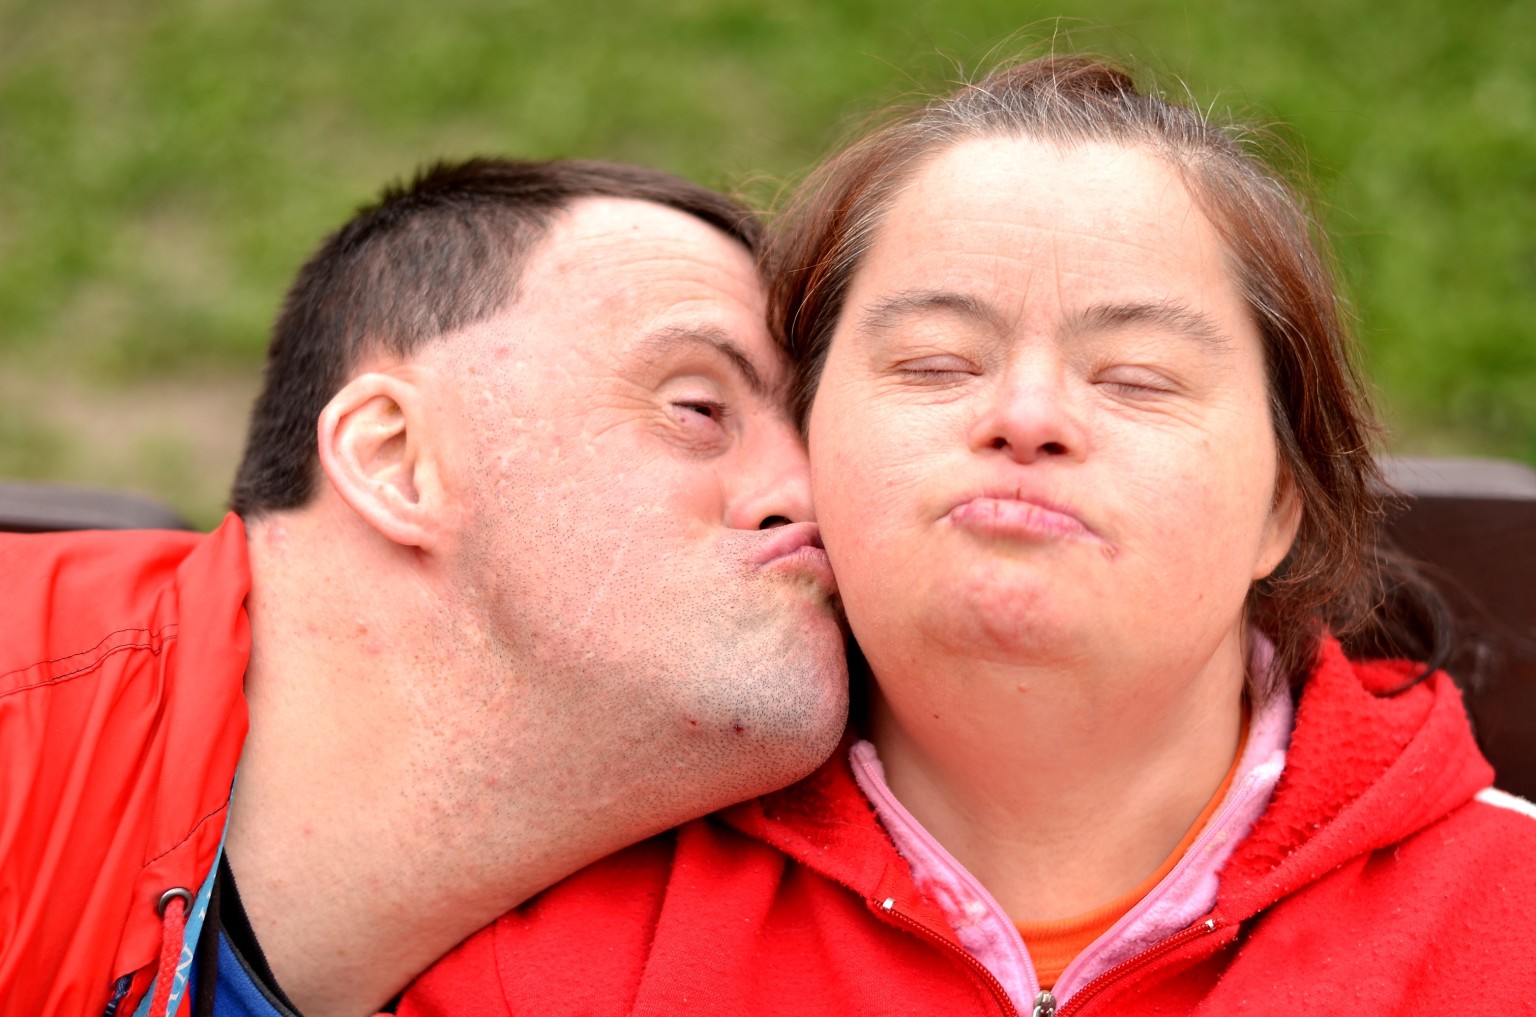 down-syndrome-treatment-study-shows-experimental-drug-reverses